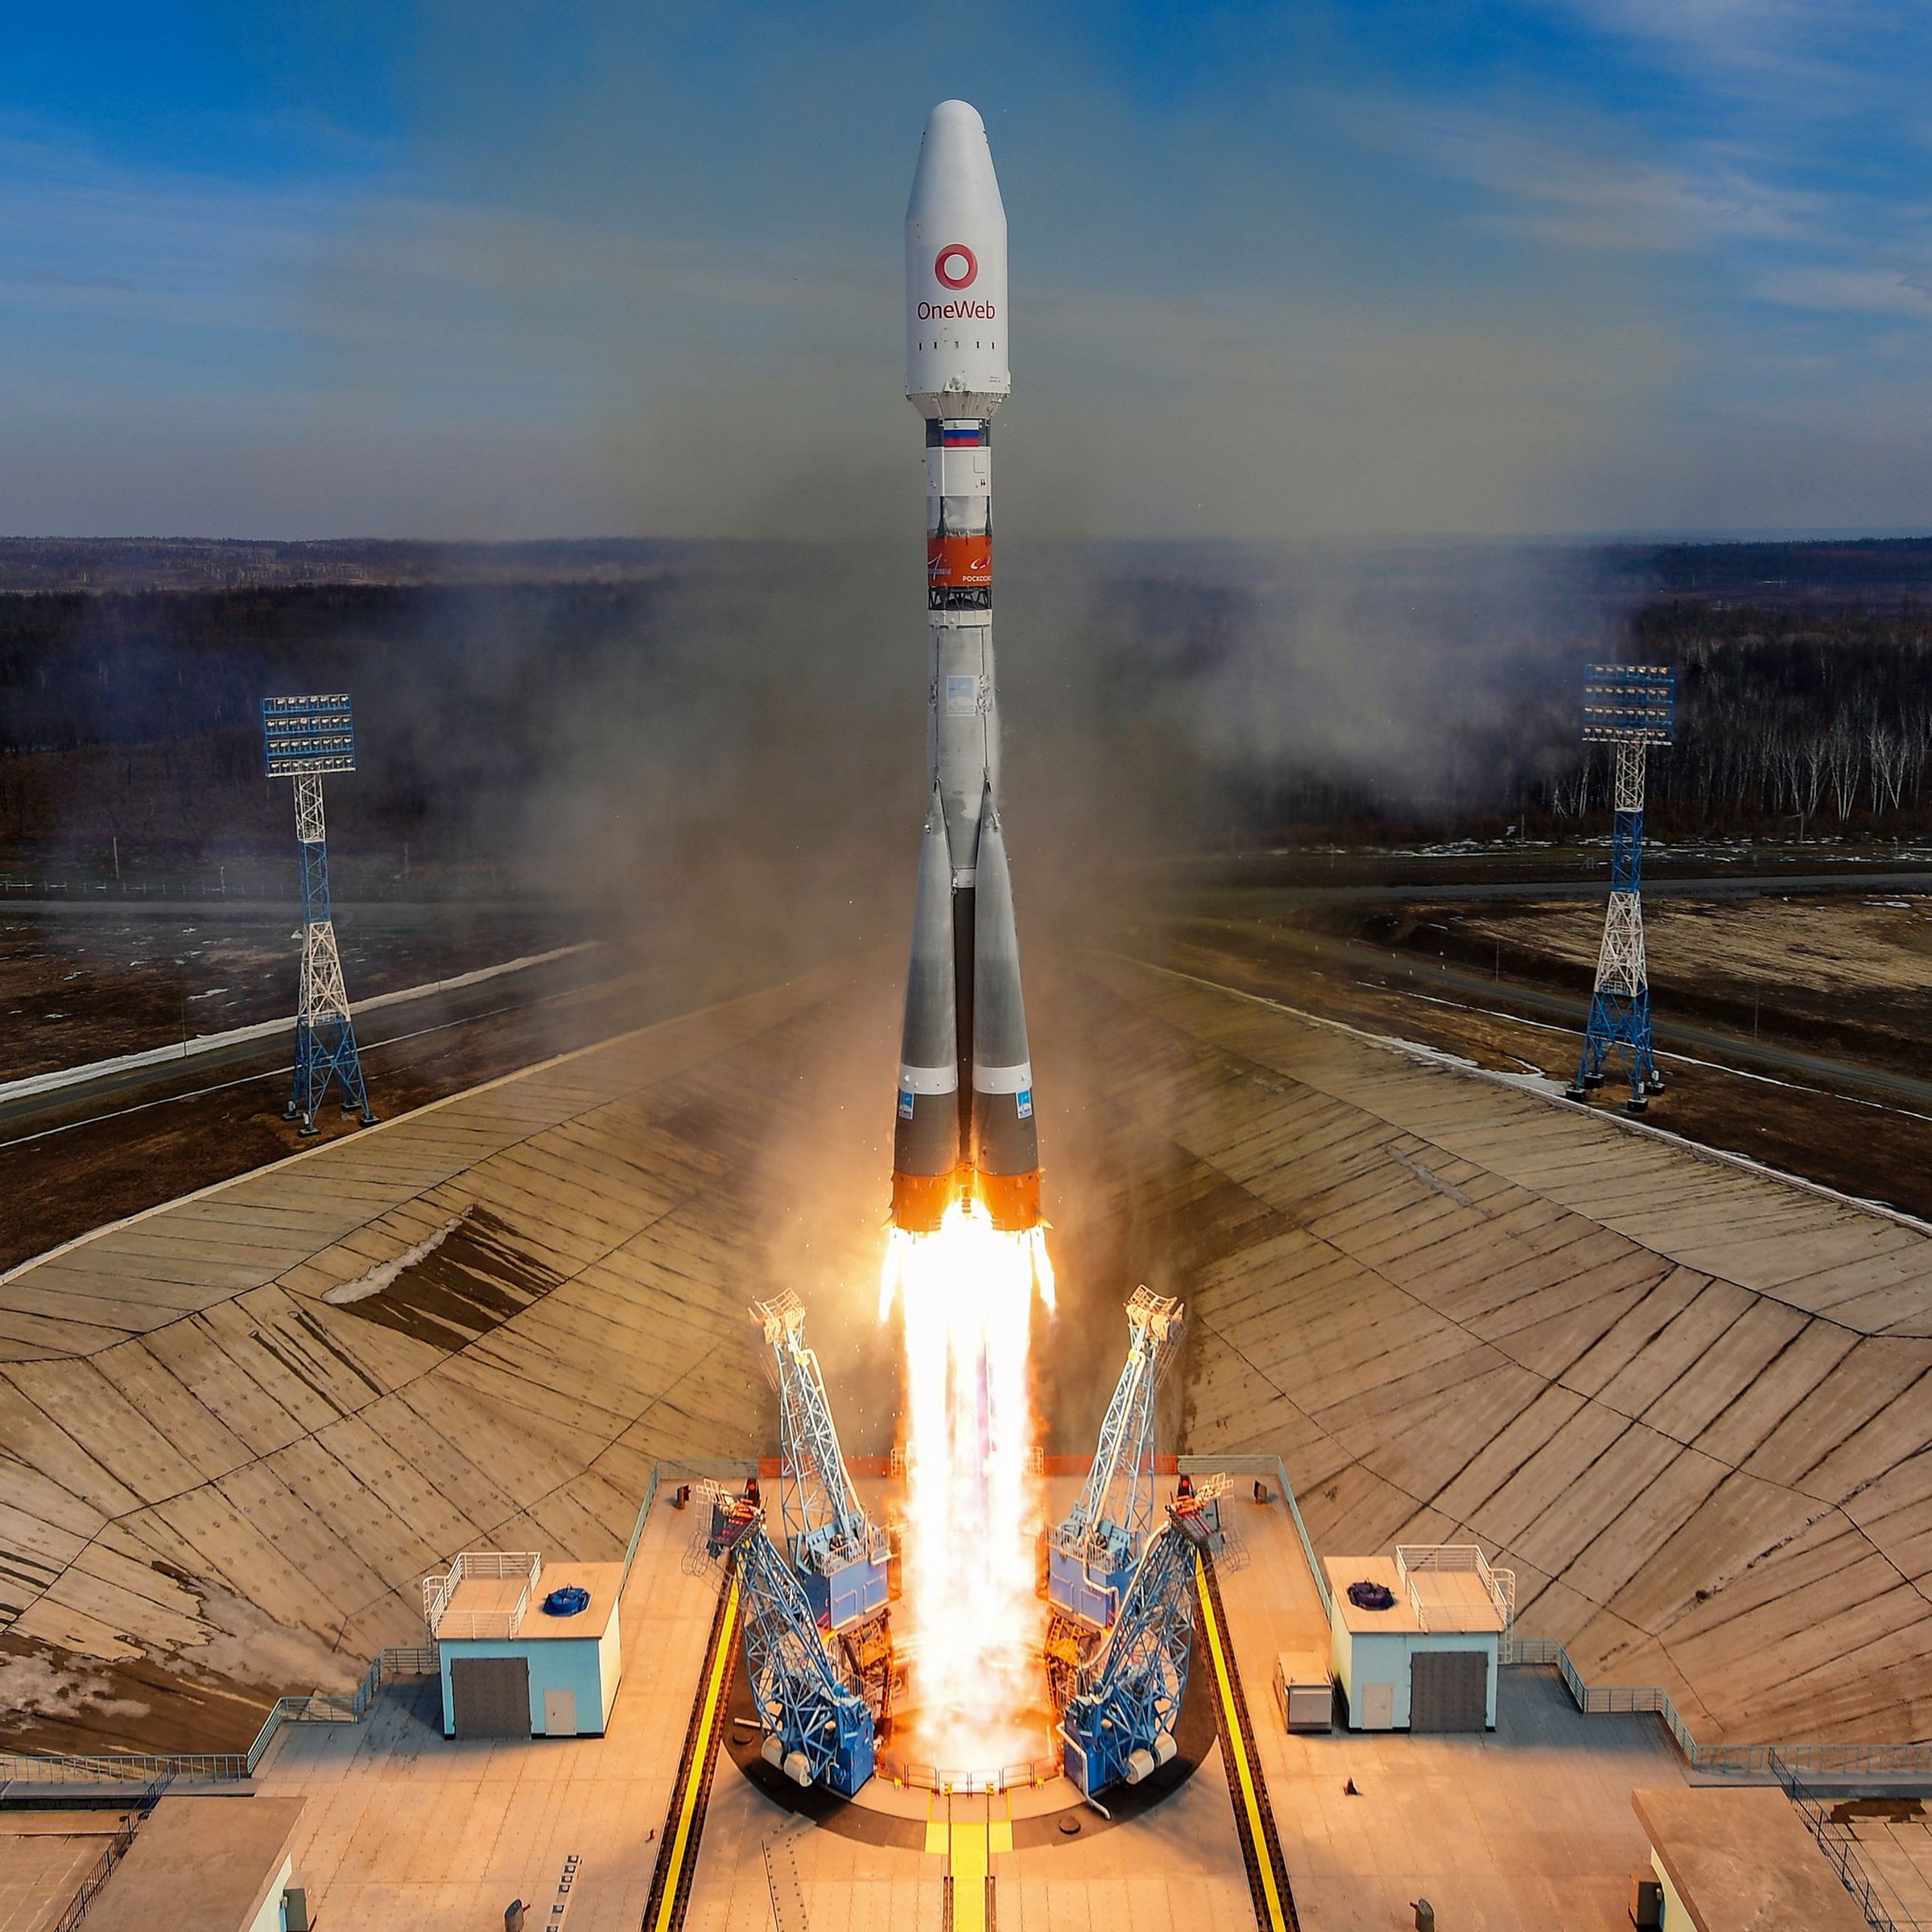 A Soyuz rocket launches 36 OneWeb satellites to orbit from the Vostochny Cosmodrome in Russia’s Far East.